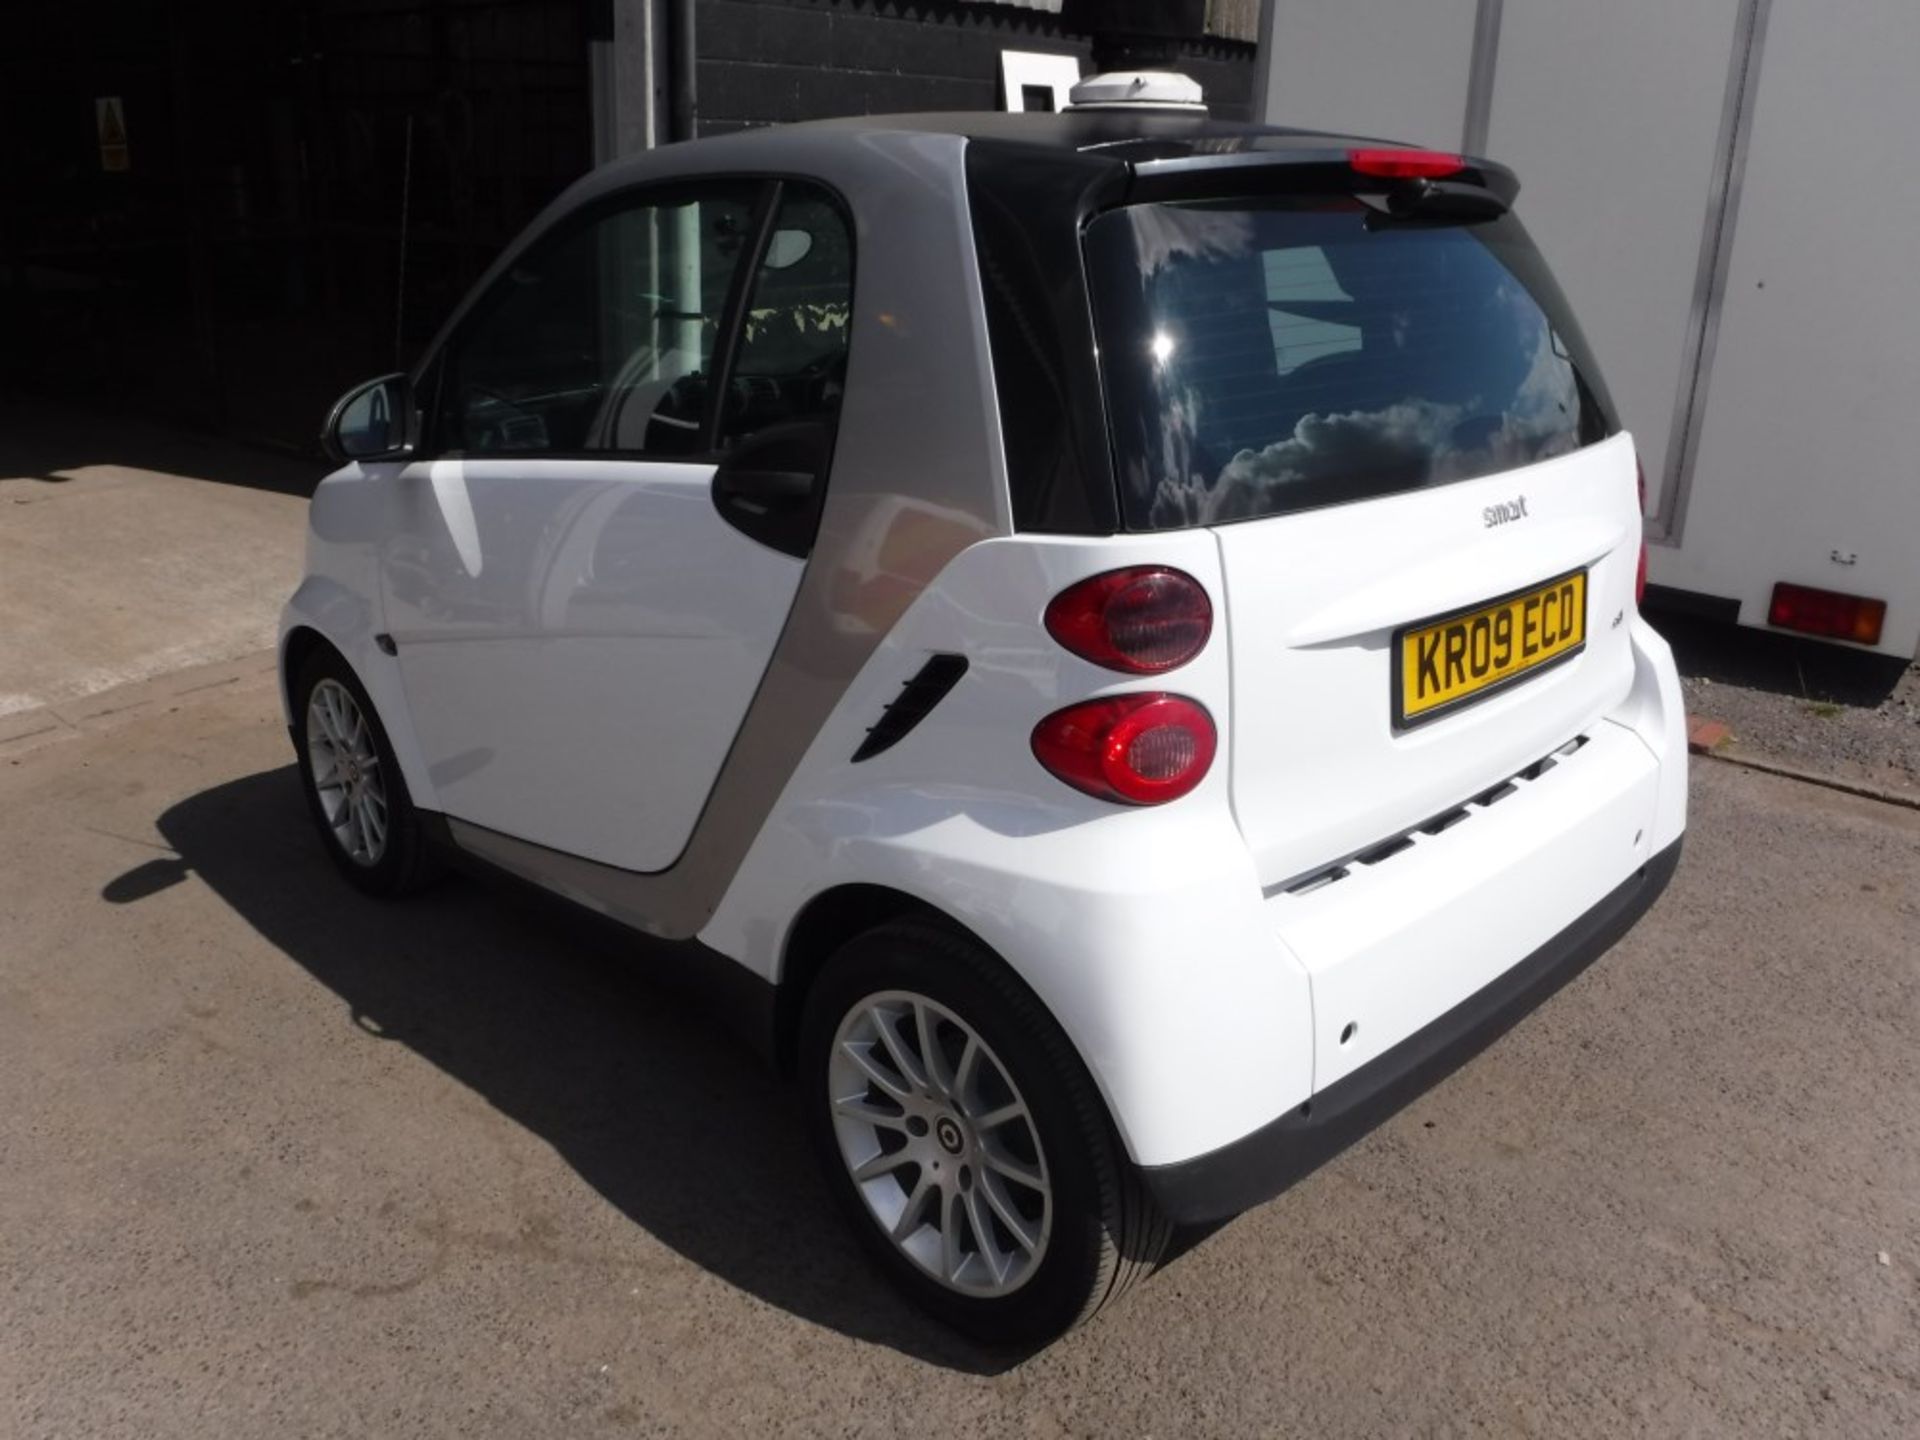 09 ref SMART FORTWO PASSION CDI AUTO COUPE, 1ST REG 06/09, TEST 06/16, 42483M WARRANTED, V5 HERE, - Image 3 of 5